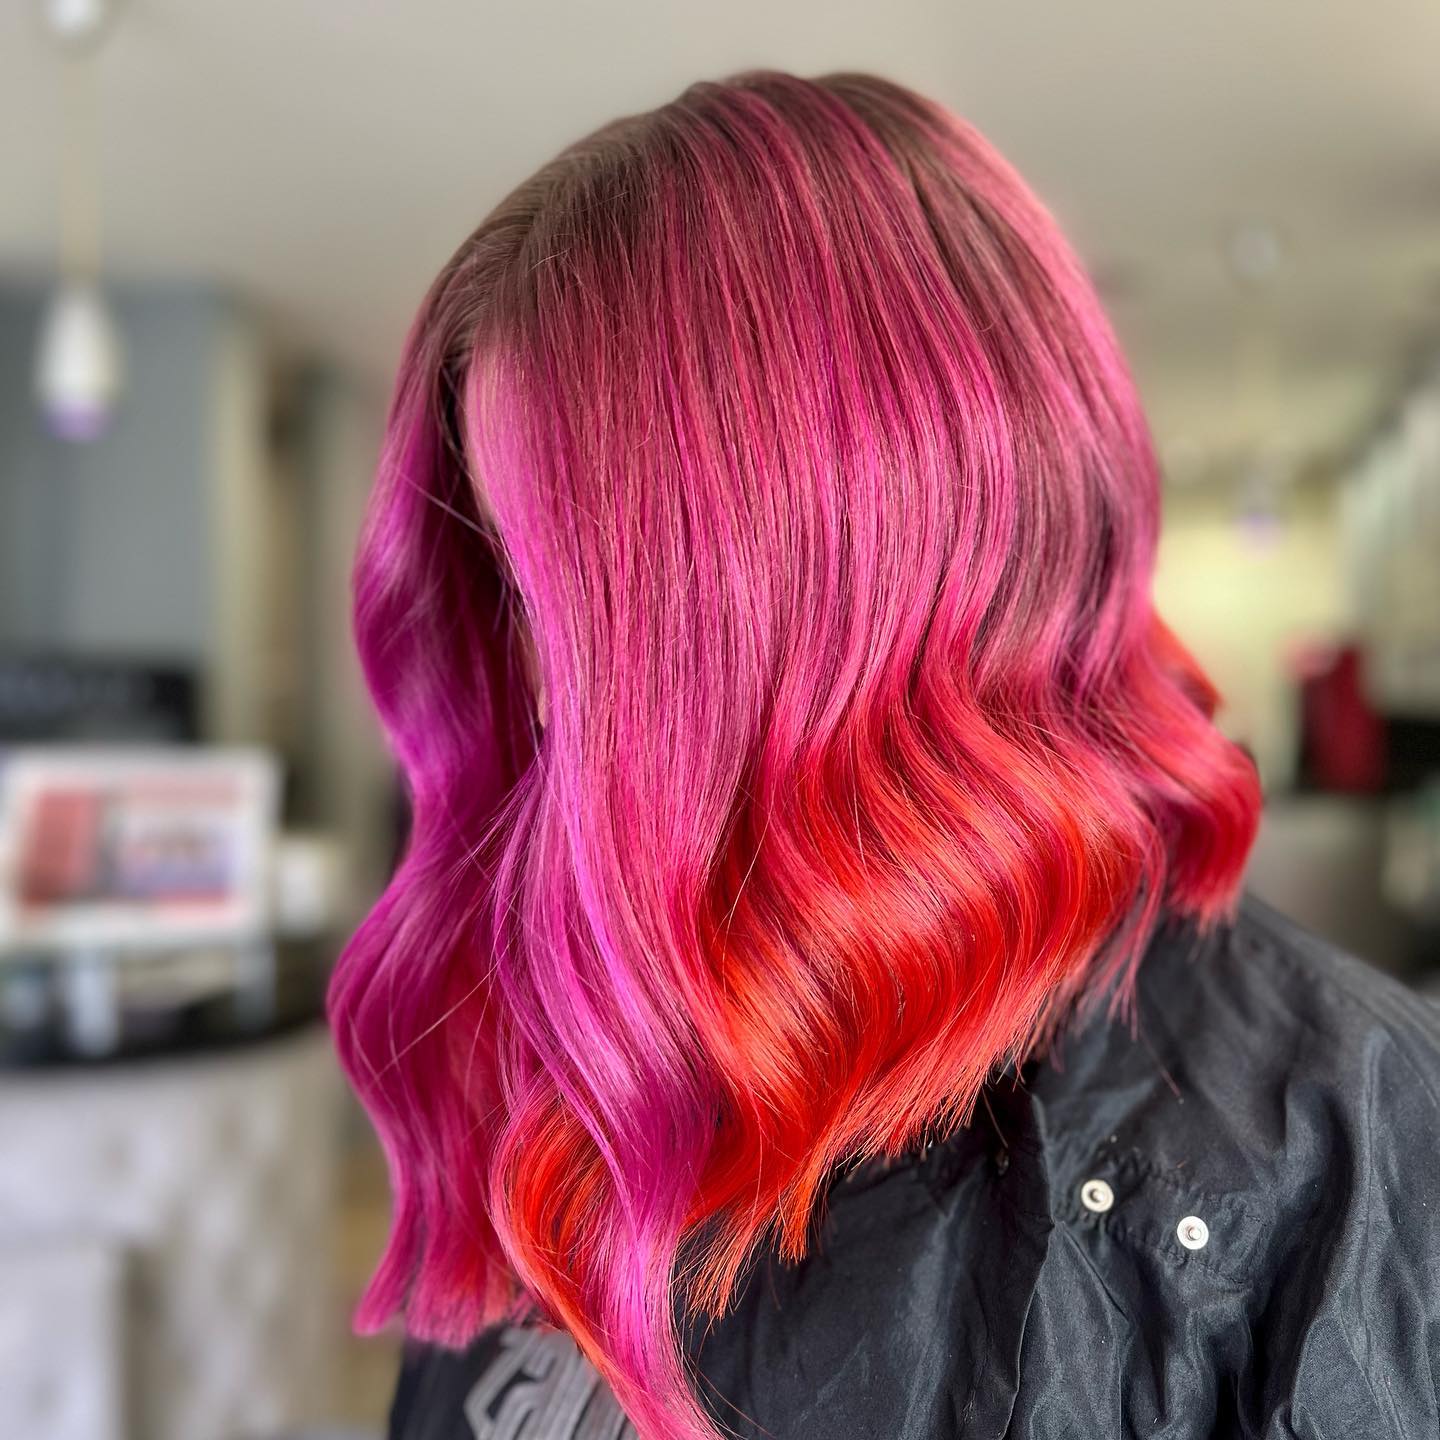 pink ombre hair color 71 Ombre pink hair blonde | Pastel pink ombre hair | Pink balayage Hair Pink Ombre Hair Color for Women